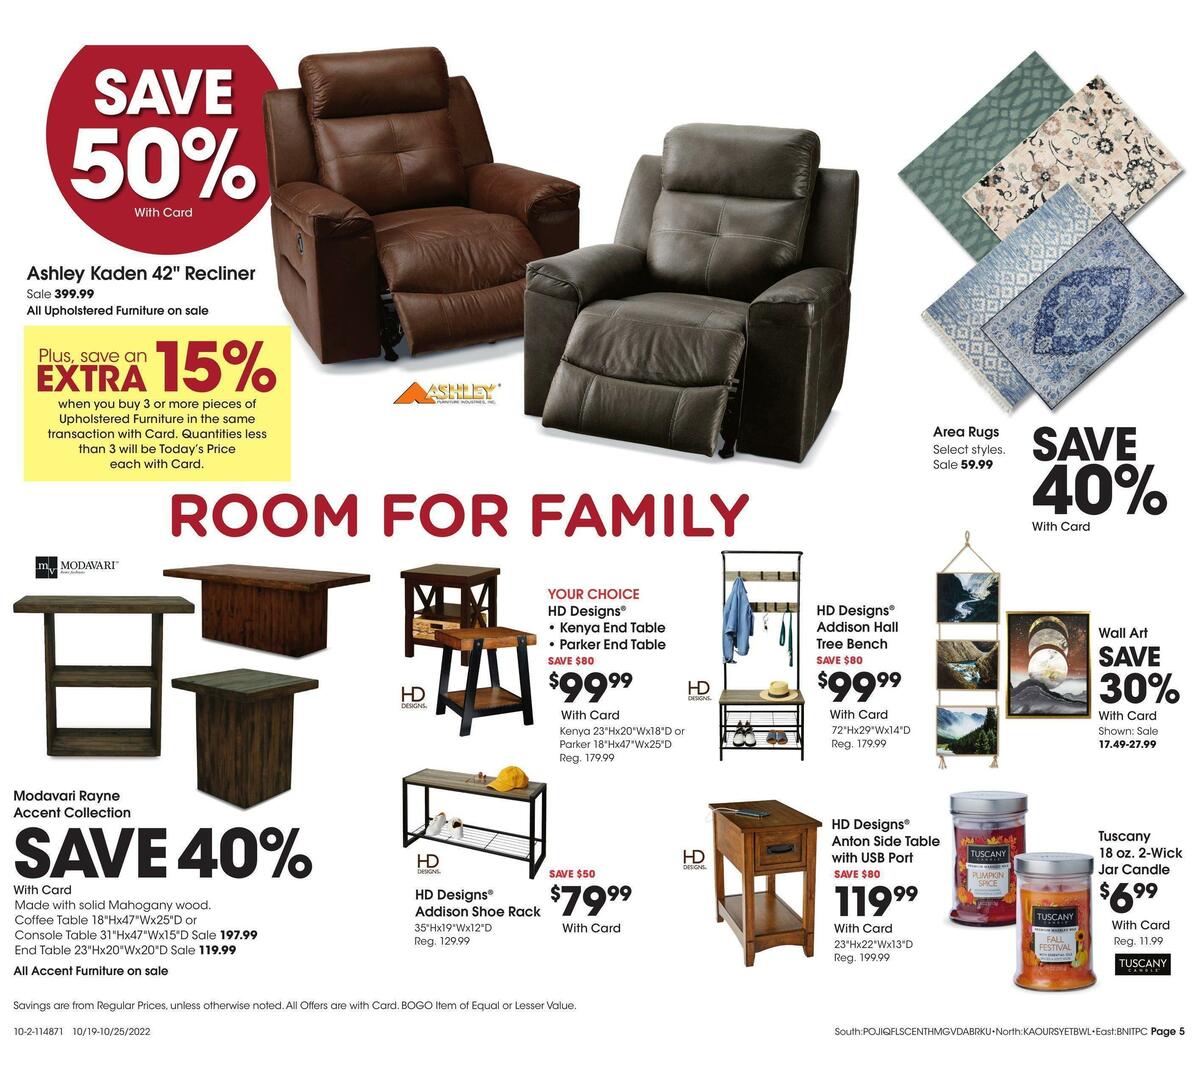 Fred Meyer General Merchandise Weekly Ad from October 19